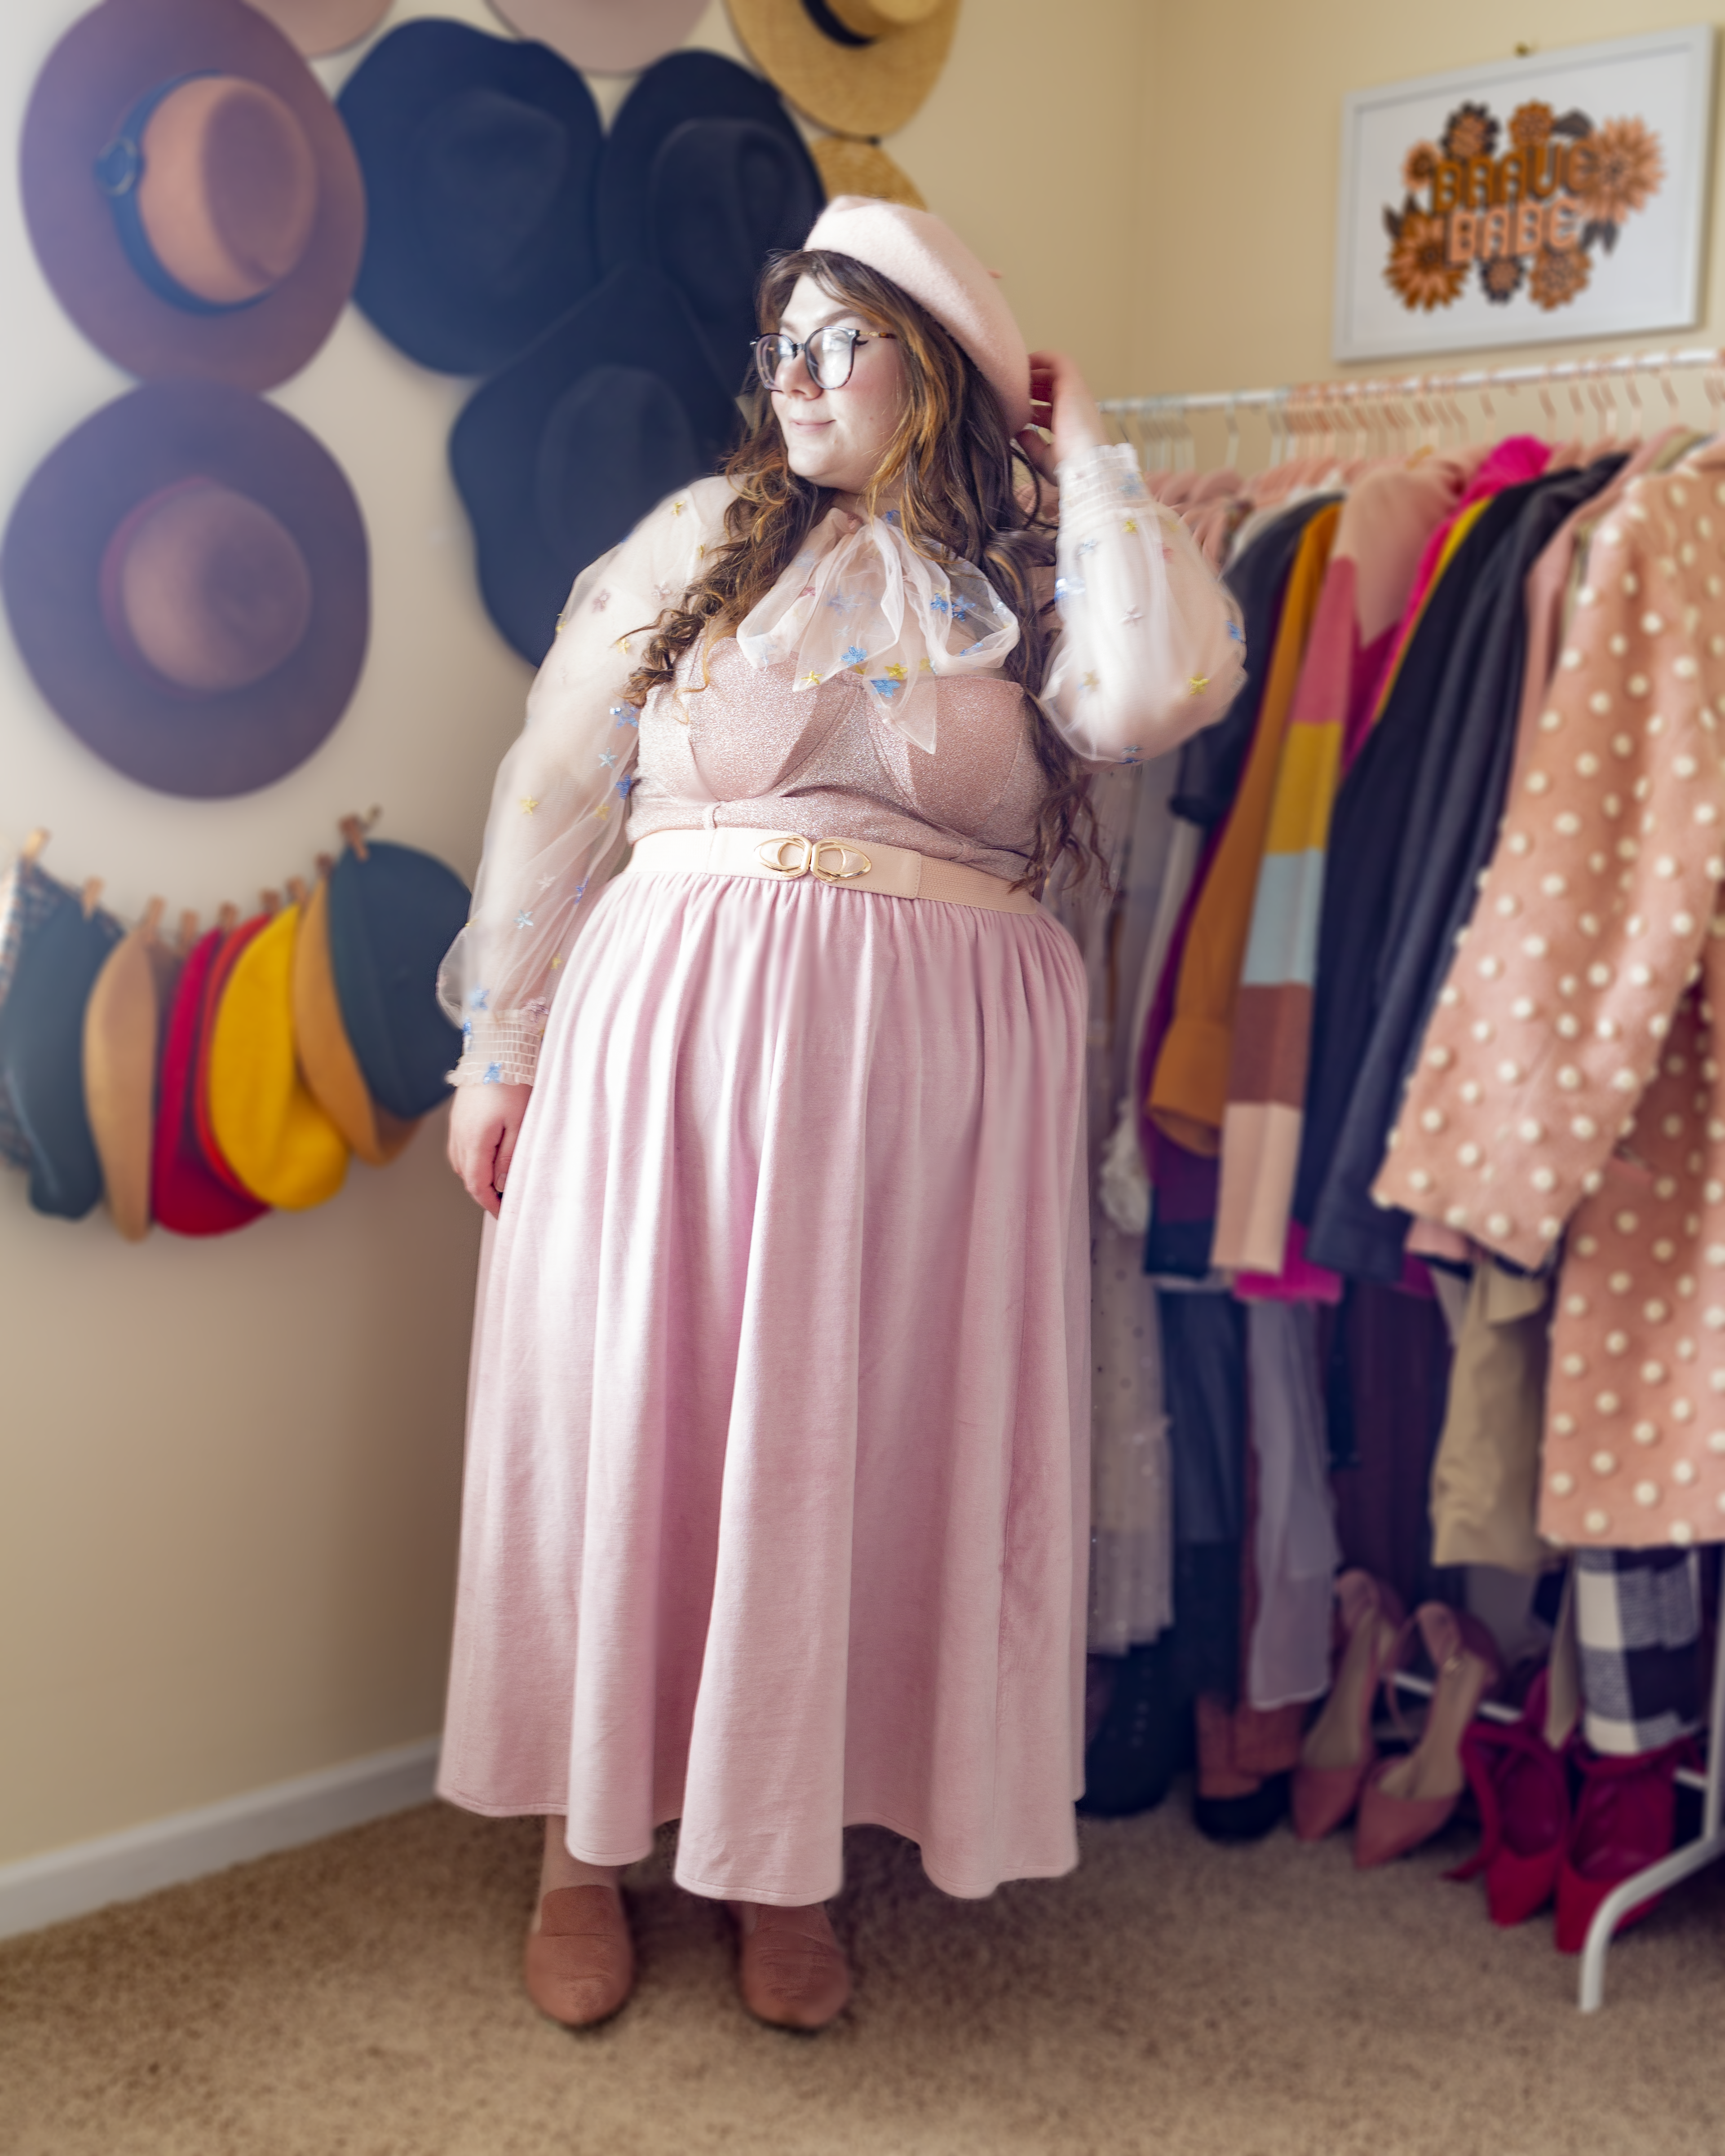 An outfit consisting of a beige wide brim hat, sheer white sheer bow blouse with pastel pink, yellow and blue sequin flowers, tucked into pastel pink velour midi skater skirt, and pink mules.